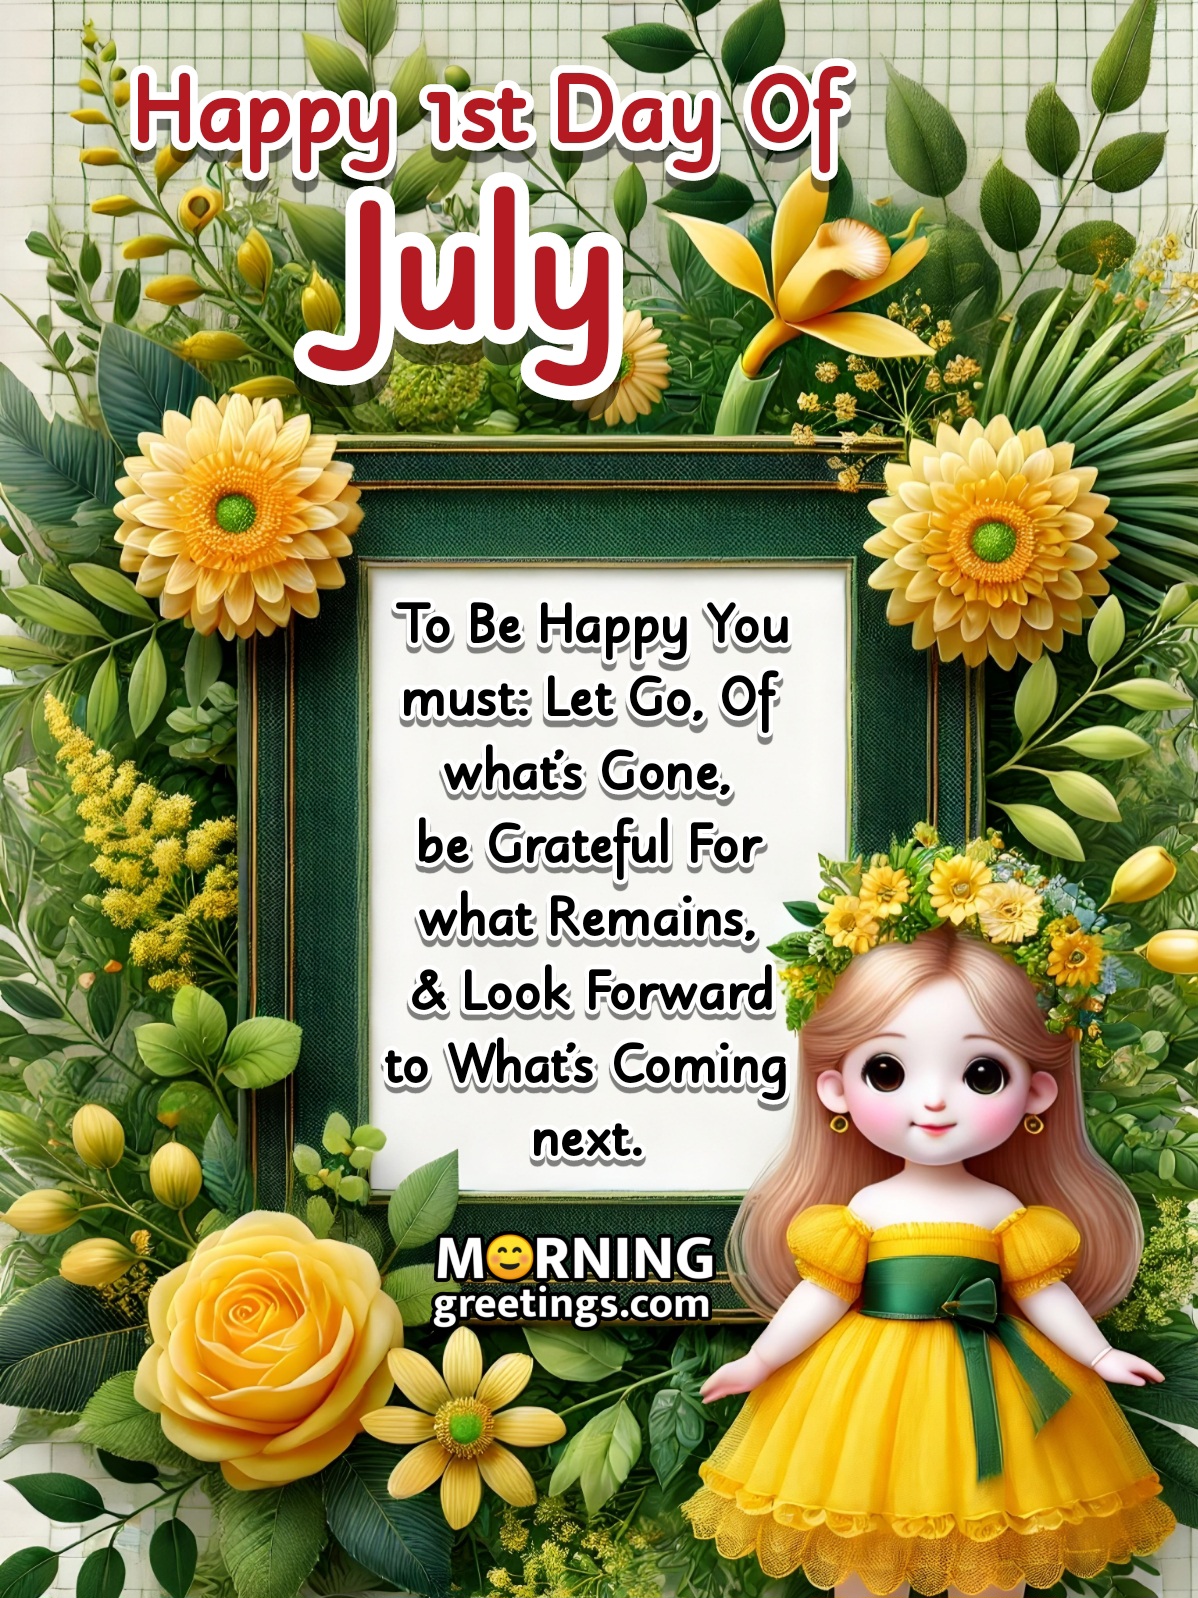 Happy 1st Day Of July Message